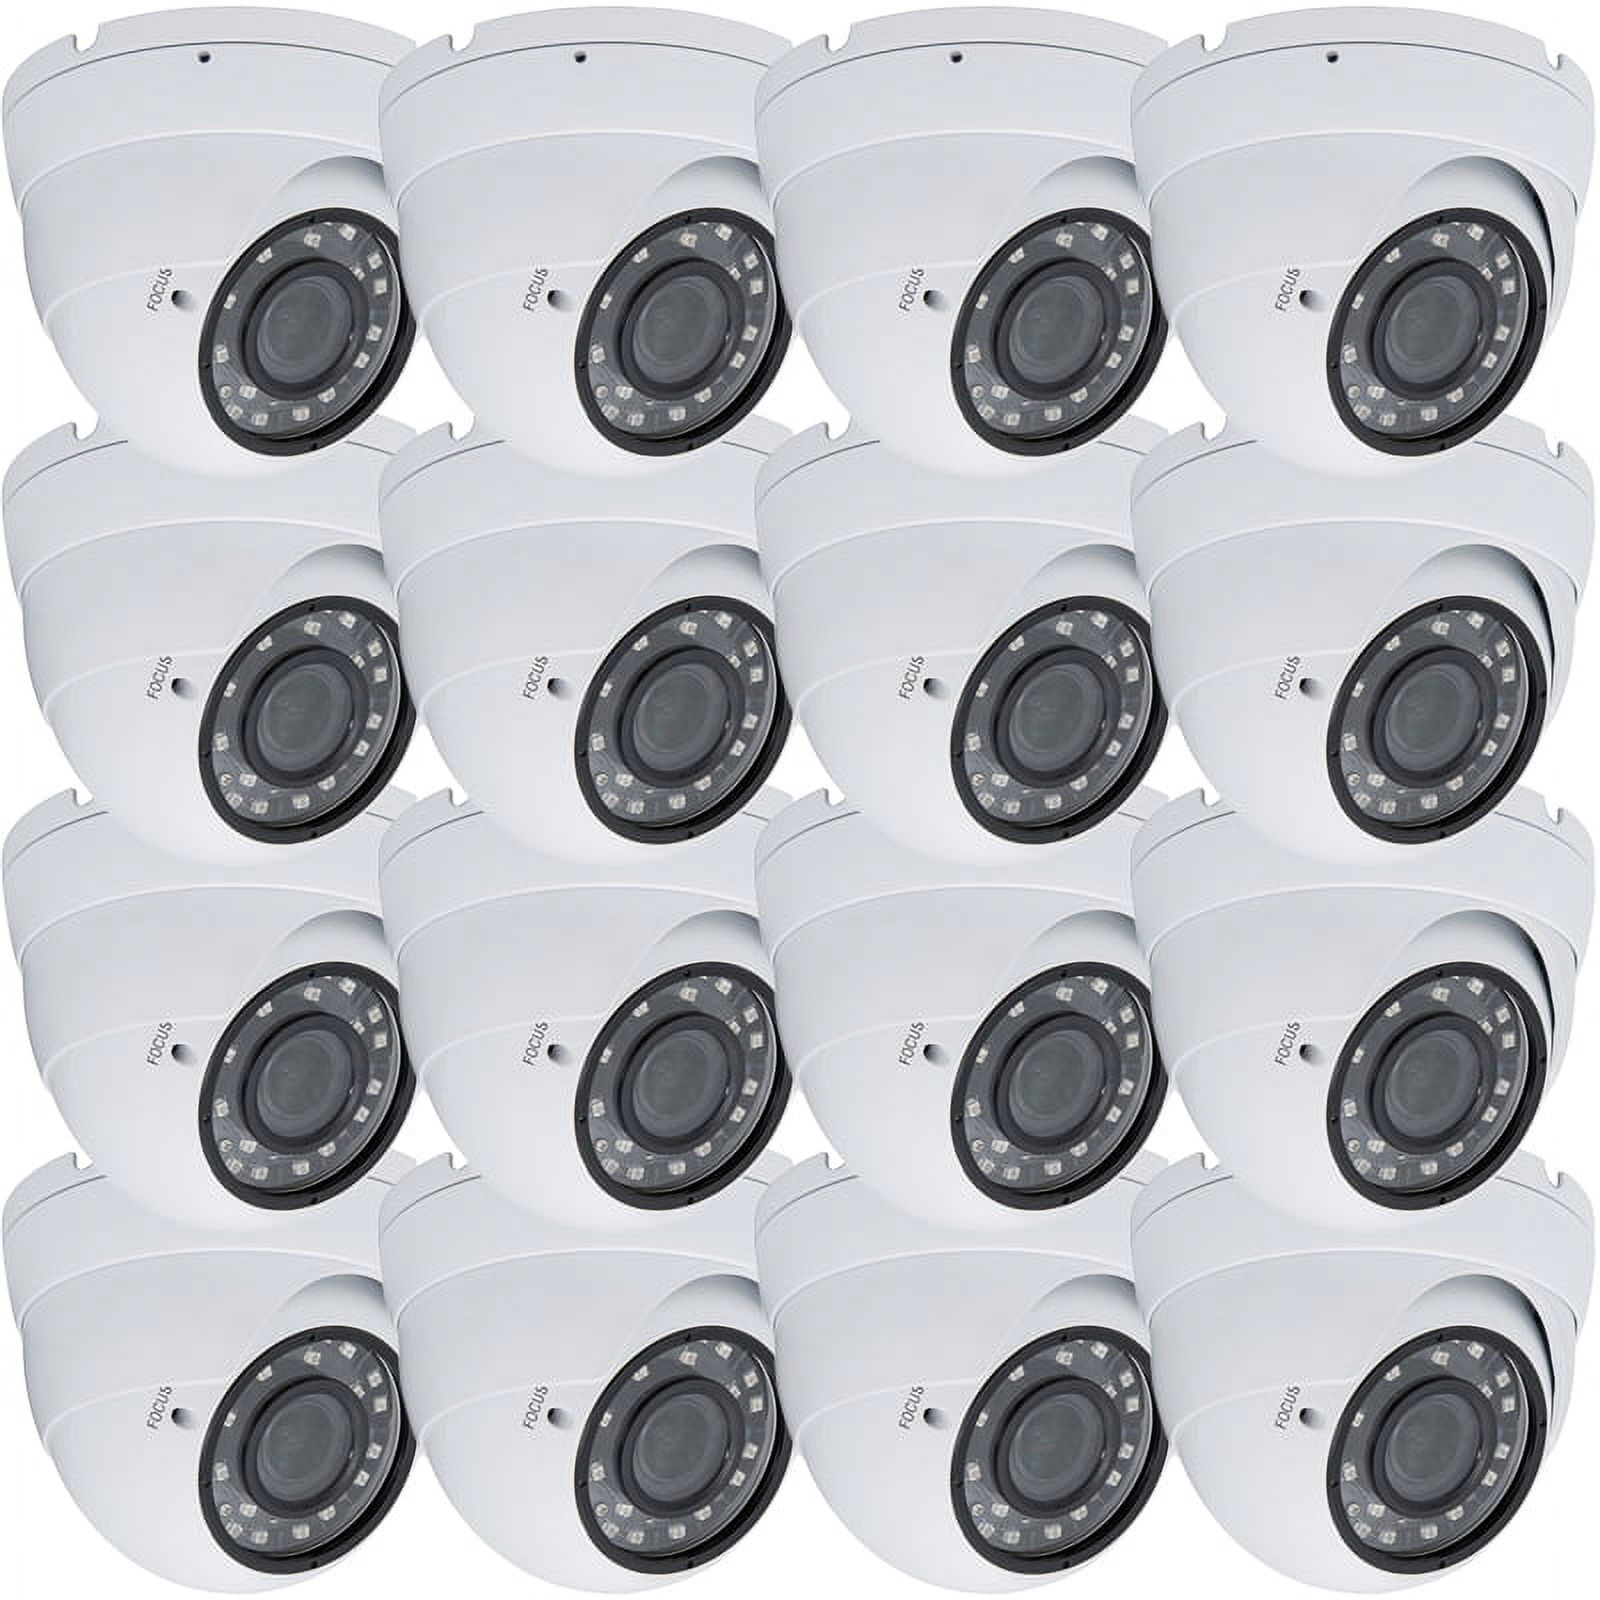 Evertech 16 pcs CCTV Security Camera HD 1080p, 2.8~12mm Wide Angle Vari-Focal Zoom Lens Indoor & Outdoor Day & Night Vision Home Security Surveillance Dome Camera - image 1 of 5